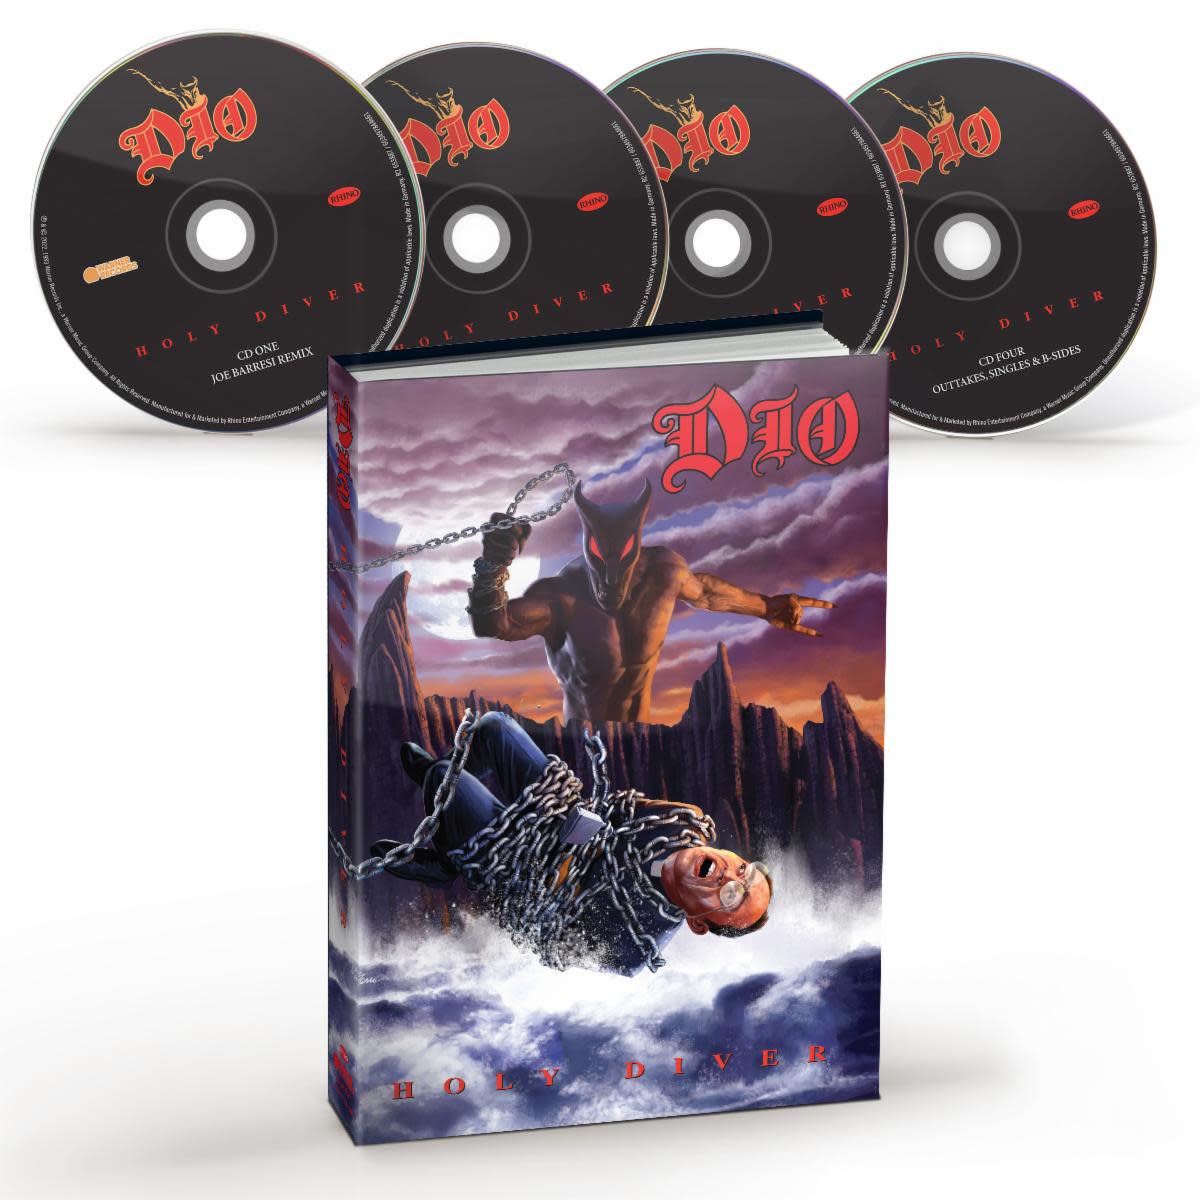 Holy Diver's 4-CD super deluxe edition.